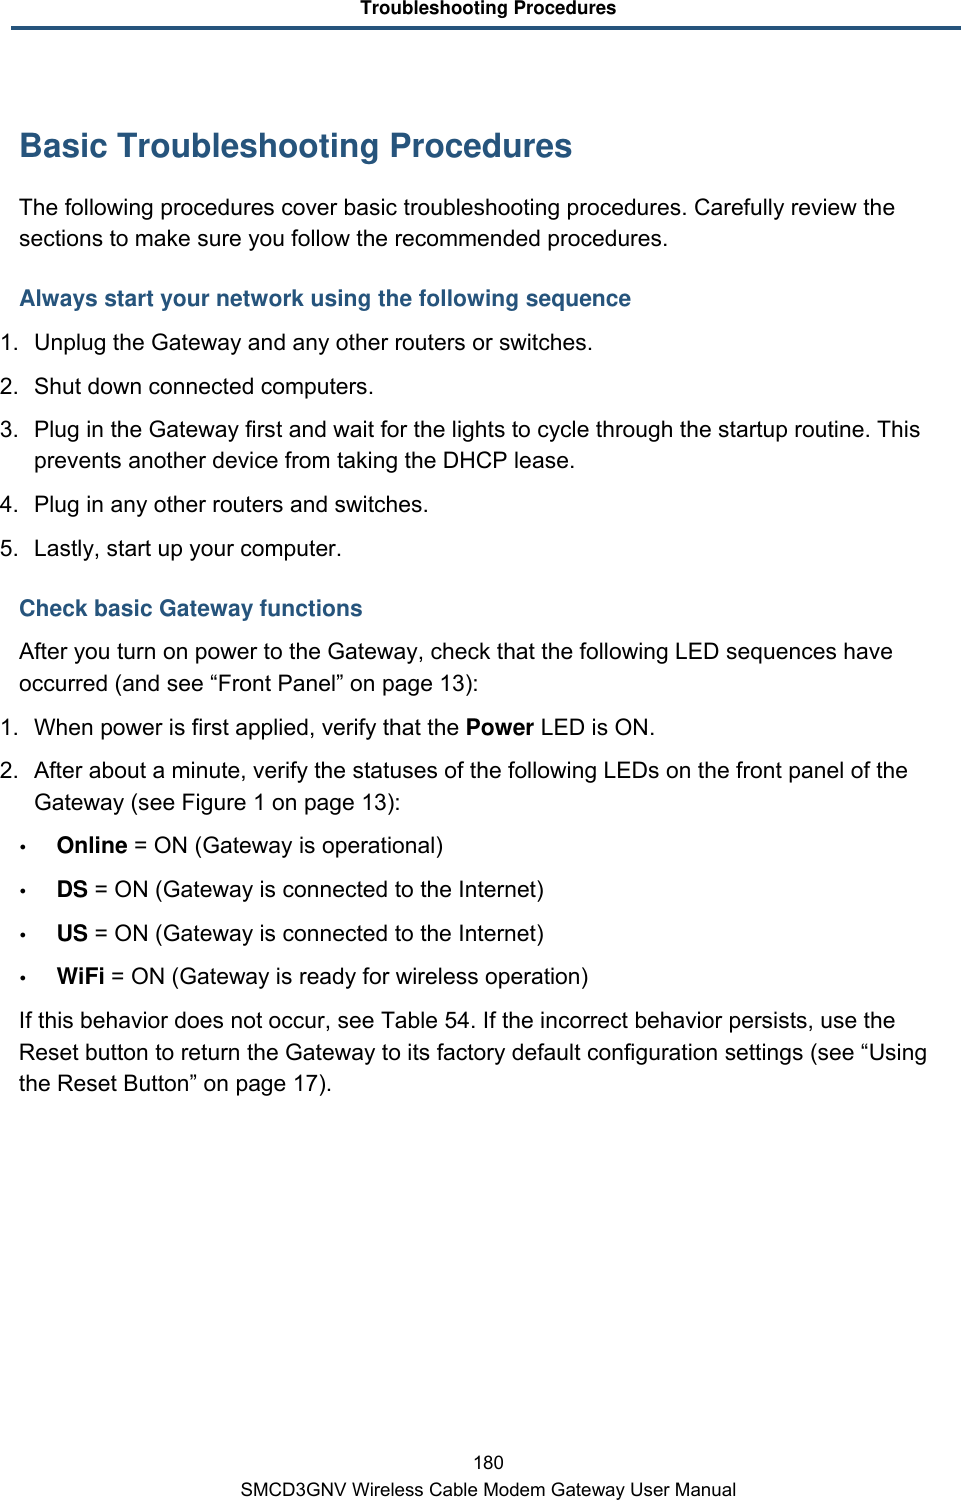 Troubleshooting Procedures 180 SMCD3GNV Wireless Cable Modem Gateway User Manual Basic Troubleshooting Procedures The following procedures cover basic troubleshooting procedures. Carefully review the sections to make sure you follow the recommended procedures. Always start your network using the following sequence 1. Unplug the Gateway and any other routers or switches.  2. Shut down connected computers.  3. Plug in the Gateway first and wait for the lights to cycle through the startup routine. This prevents another device from taking the DHCP lease. 4. Plug in any other routers and switches. 5. Lastly, start up your computer. Check basic Gateway functions After you turn on power to the Gateway, check that the following LED sequences have occurred (and see “Front Panel” on page 13): 1. When power is first applied, verify that the Power LED is ON. 2.  After about a minute, verify the statuses of the following LEDs on the front panel of the Gateway (see Figure 1 on page 13):  Online = ON (Gateway is operational)  DS = ON (Gateway is connected to the Internet)  US = ON (Gateway is connected to the Internet)  WiFi = ON (Gateway is ready for wireless operation) If this behavior does not occur, see Table 54. If the incorrect behavior persists, use the Reset button to return the Gateway to its factory default configuration settings (see “Using the Reset Button” on page 17). 